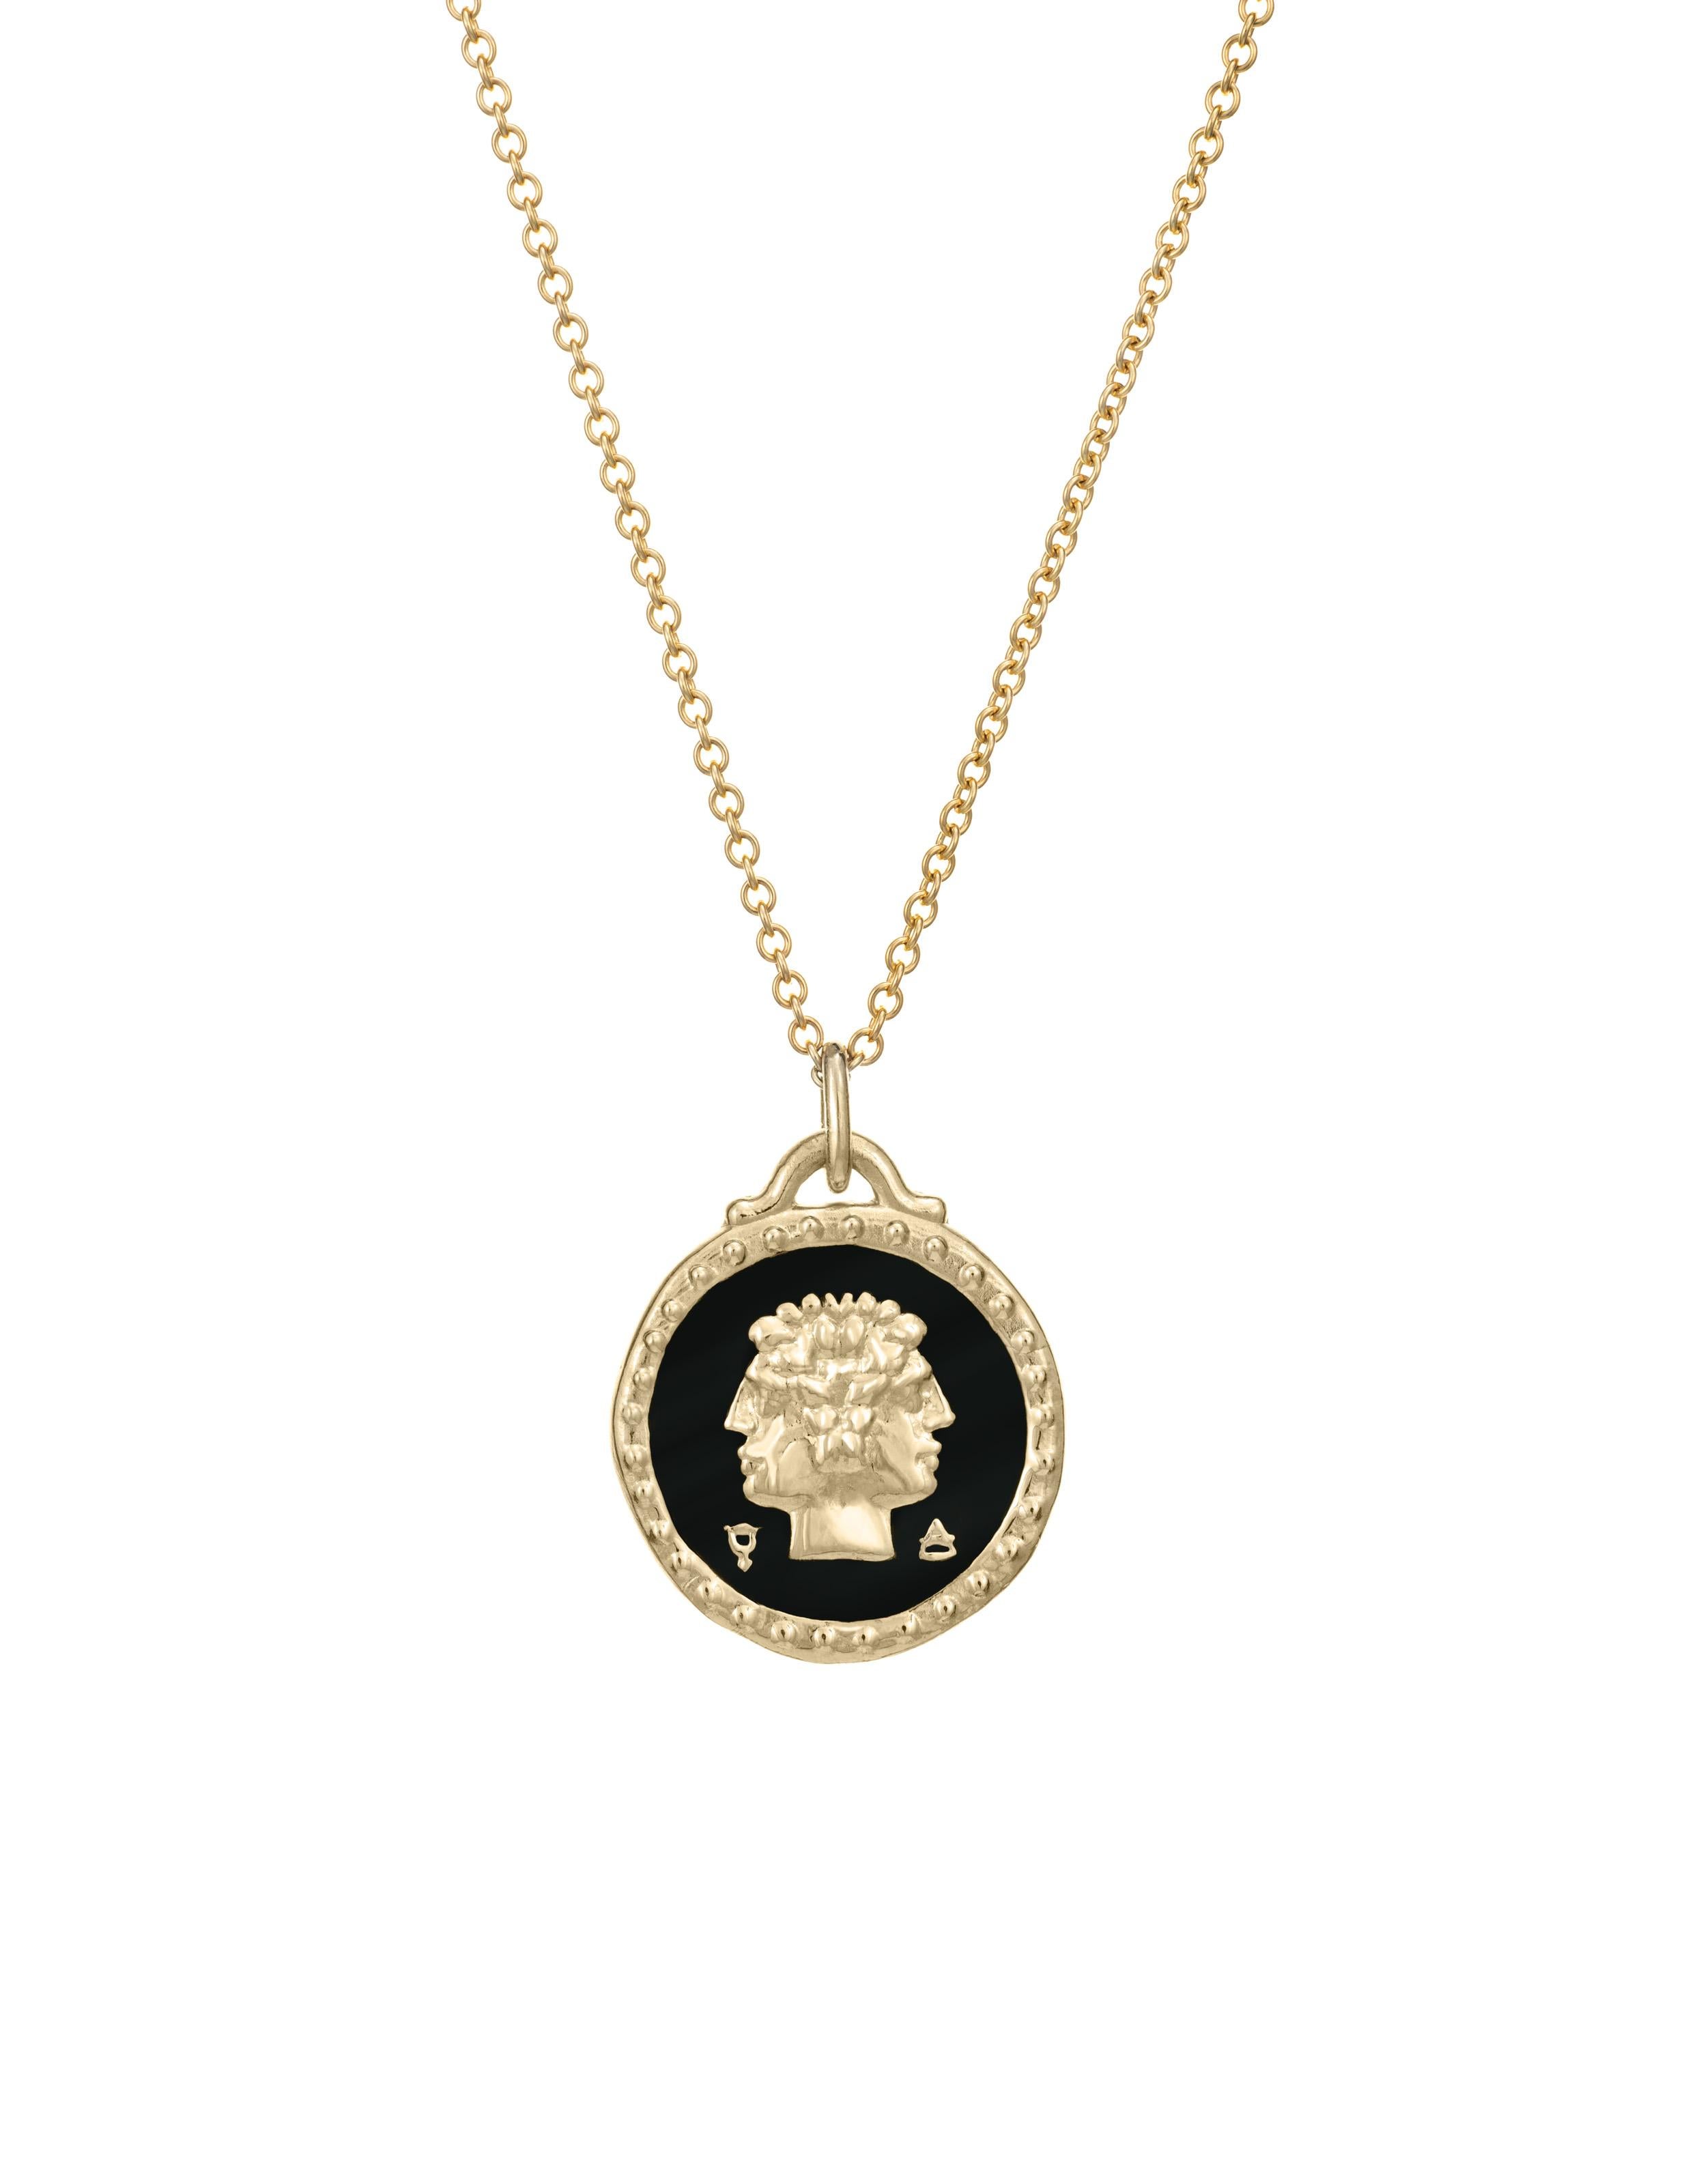 Part of our new Zodiac collection. The Gemini Pendant features the twins on one side and the Gemini symbol on the other. Designs are meticulously hand-carved into 14k gold and finished with enamel. This pendant is customizable and available in four